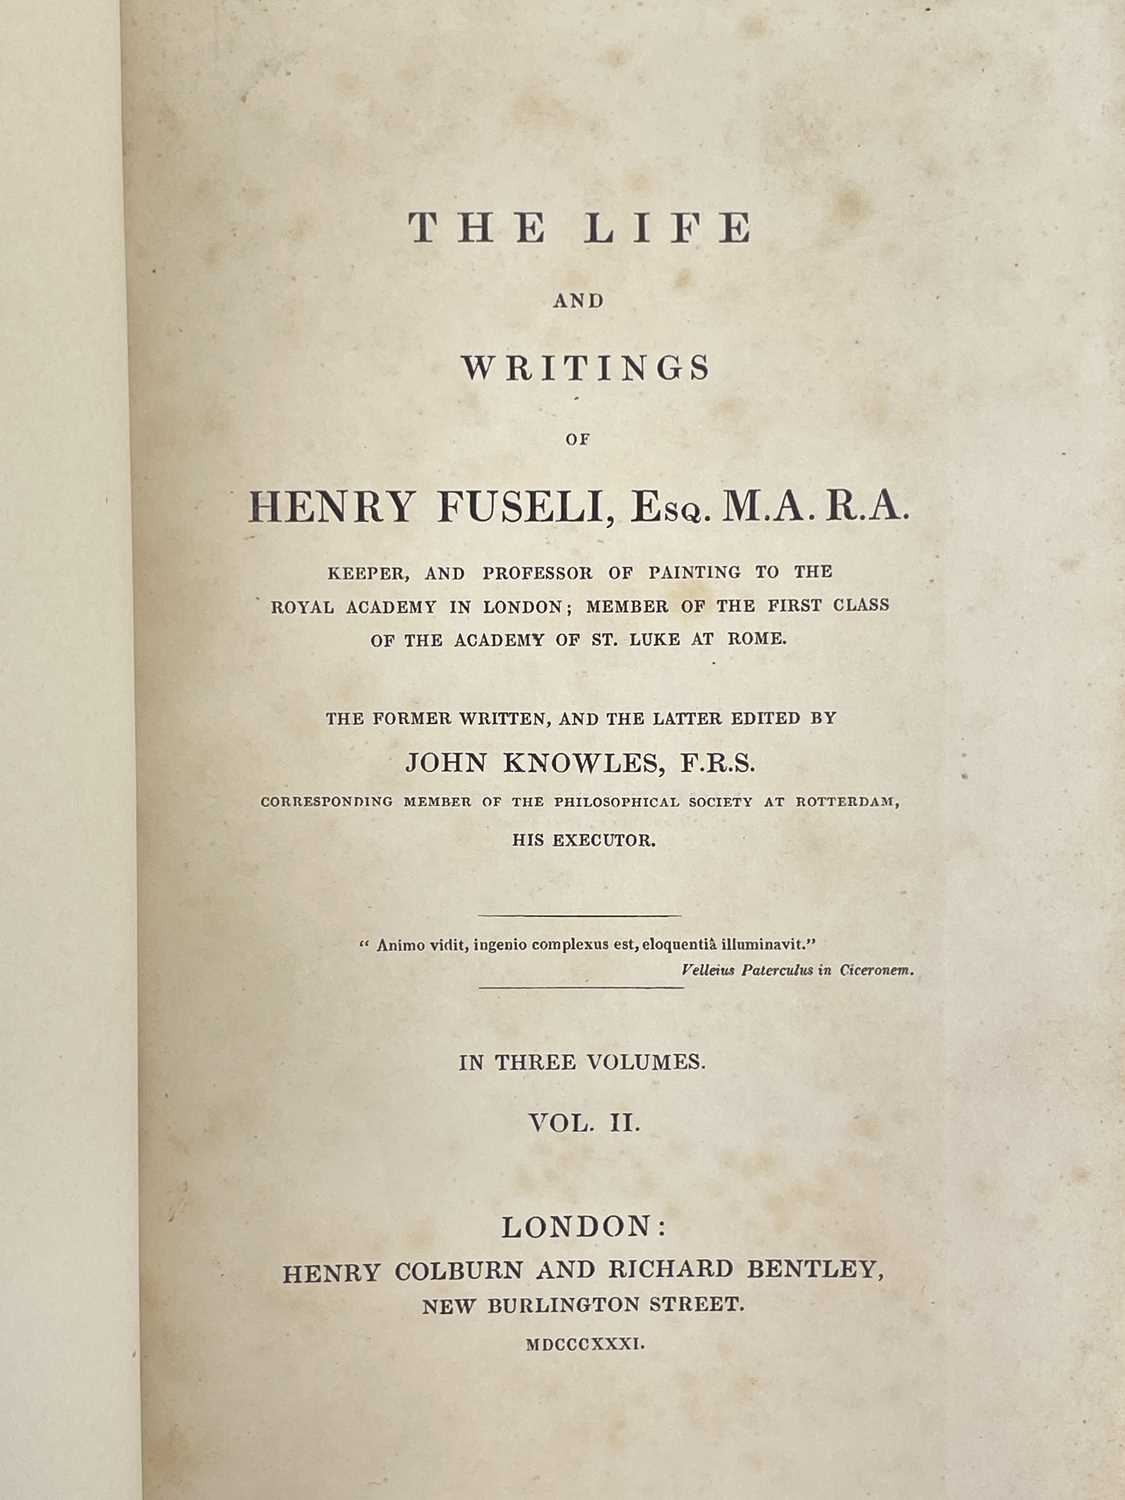 'Life And Writings Of Henry Fuseli' 'Esq. M.A.R.A. [Keeper, And Professor Of Painting To The Royal A - Image 4 of 7